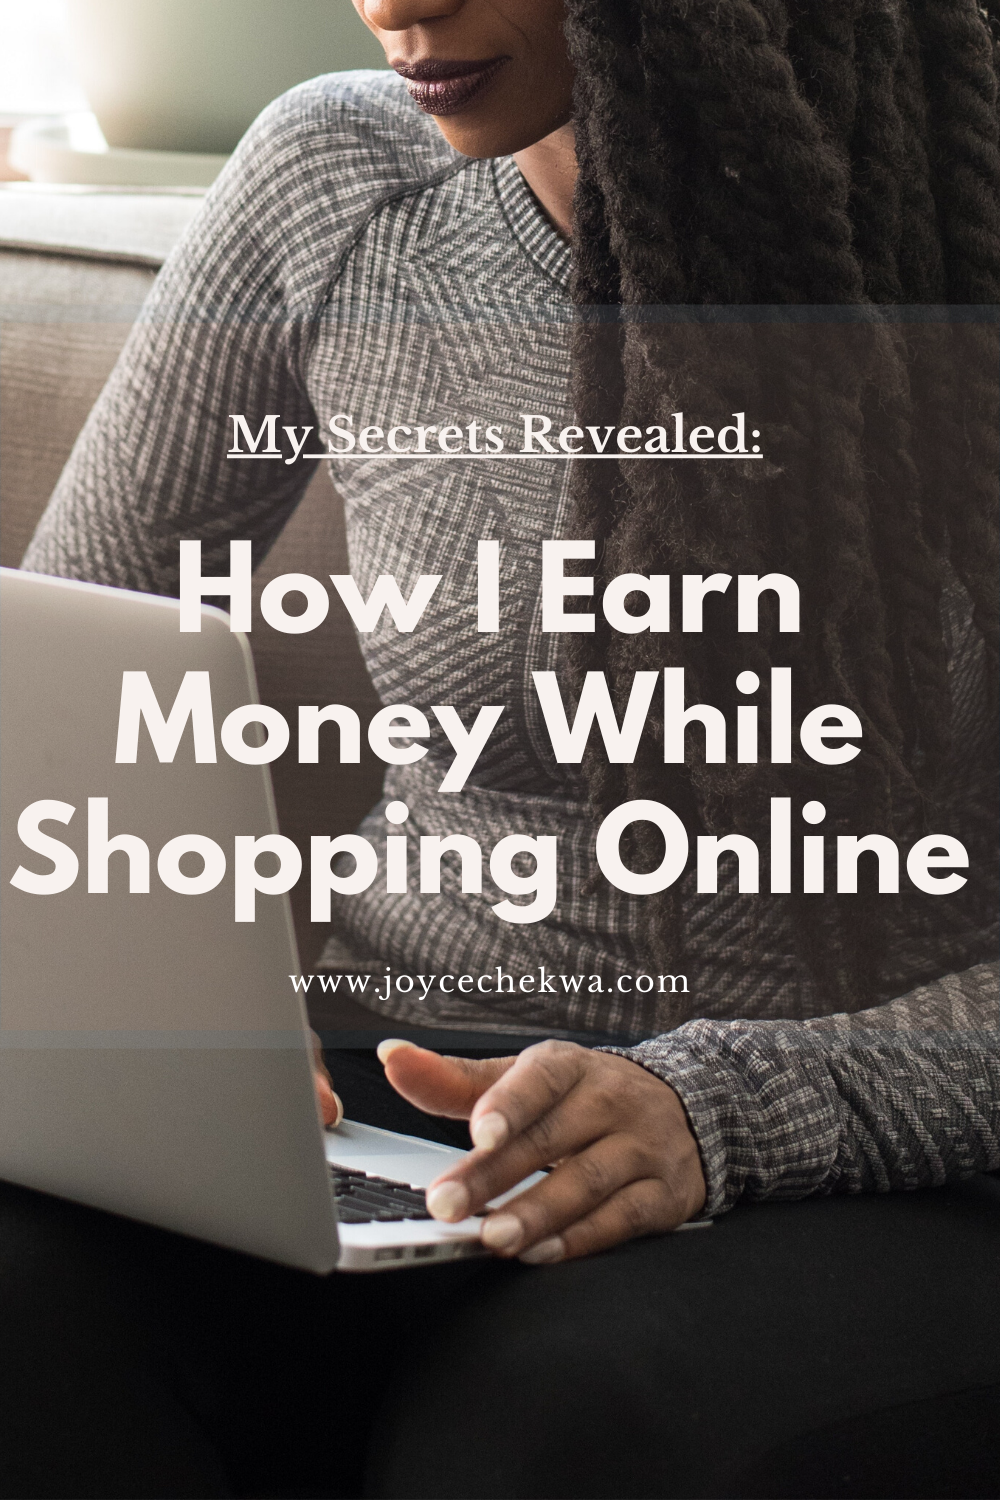 HOW I EARN MONEY WHILE SHOPPING ONLINE